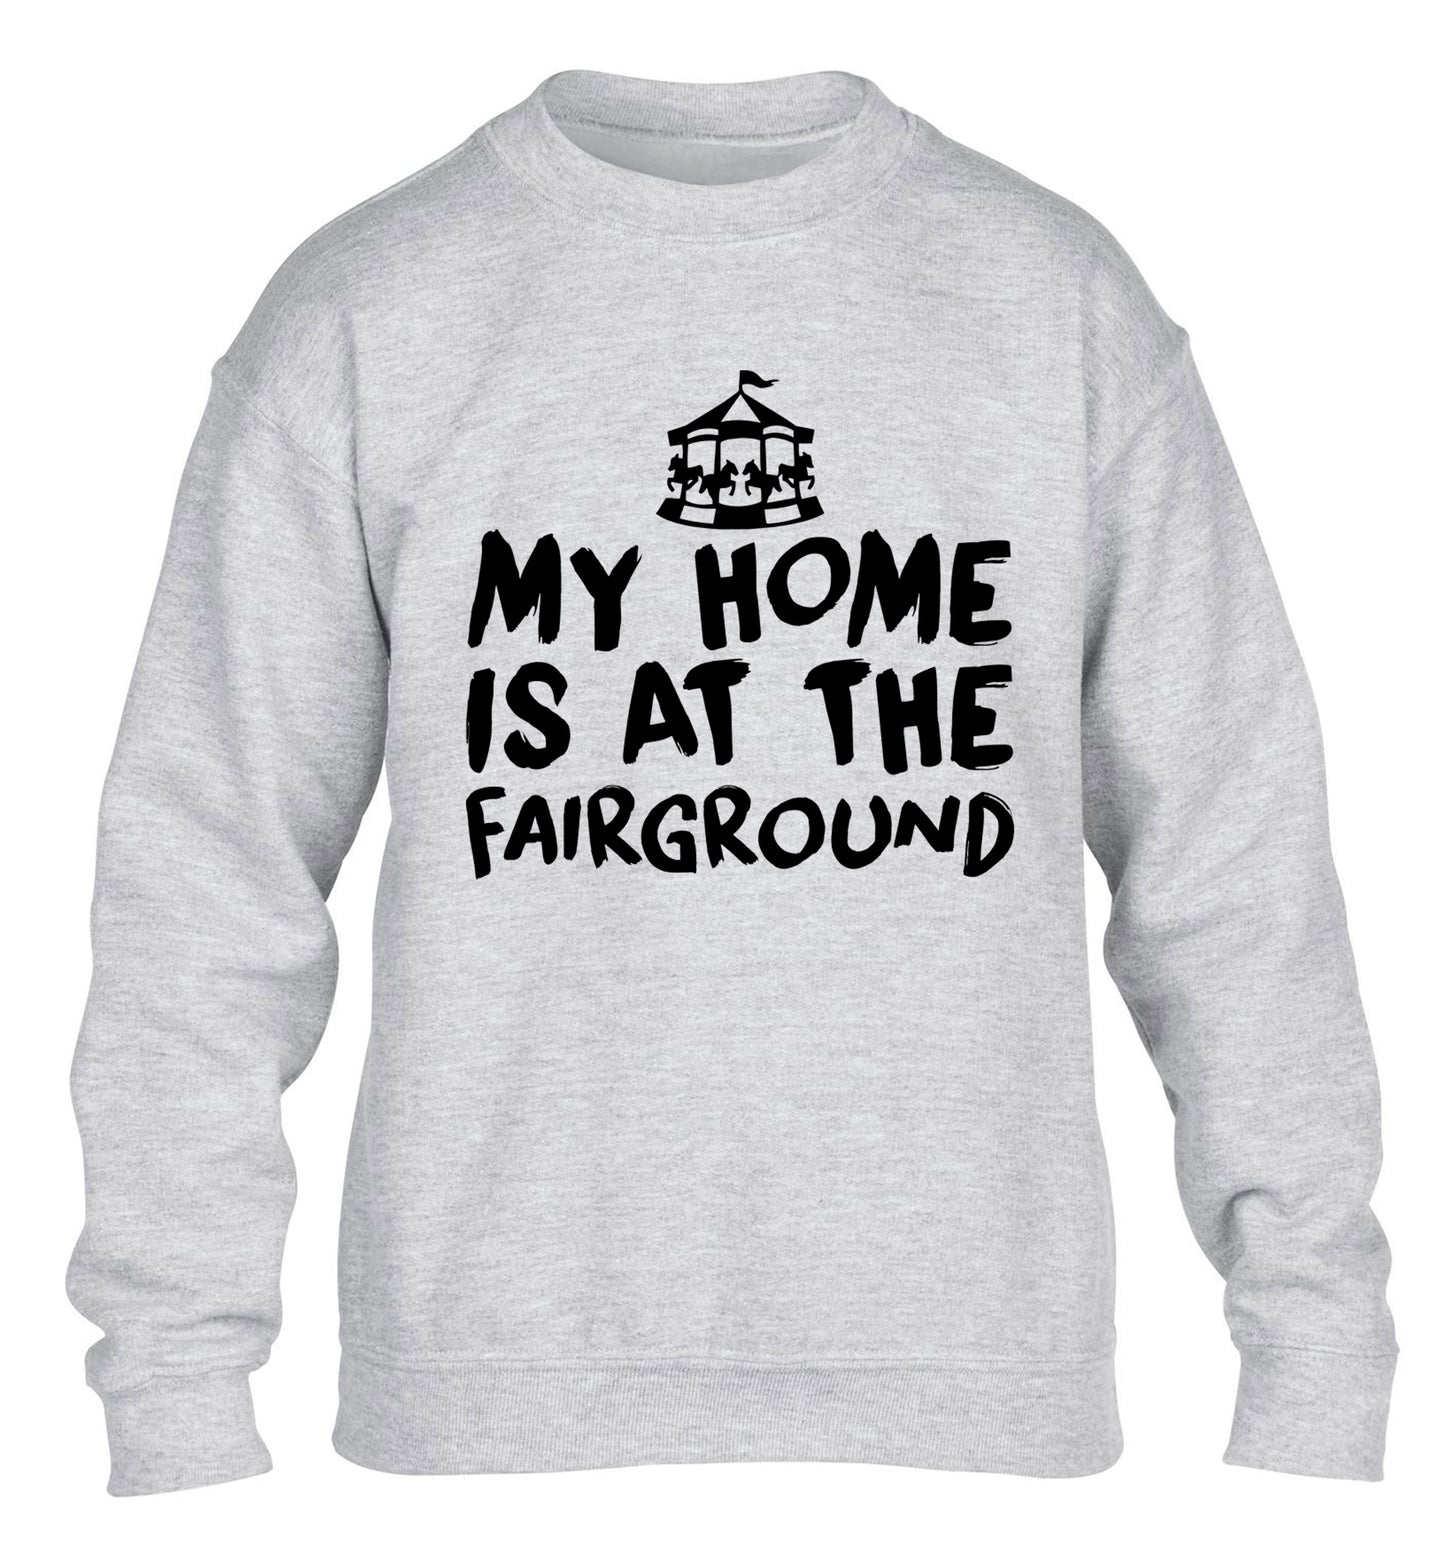 My home is at the fairground children's grey sweater 12-14 Years